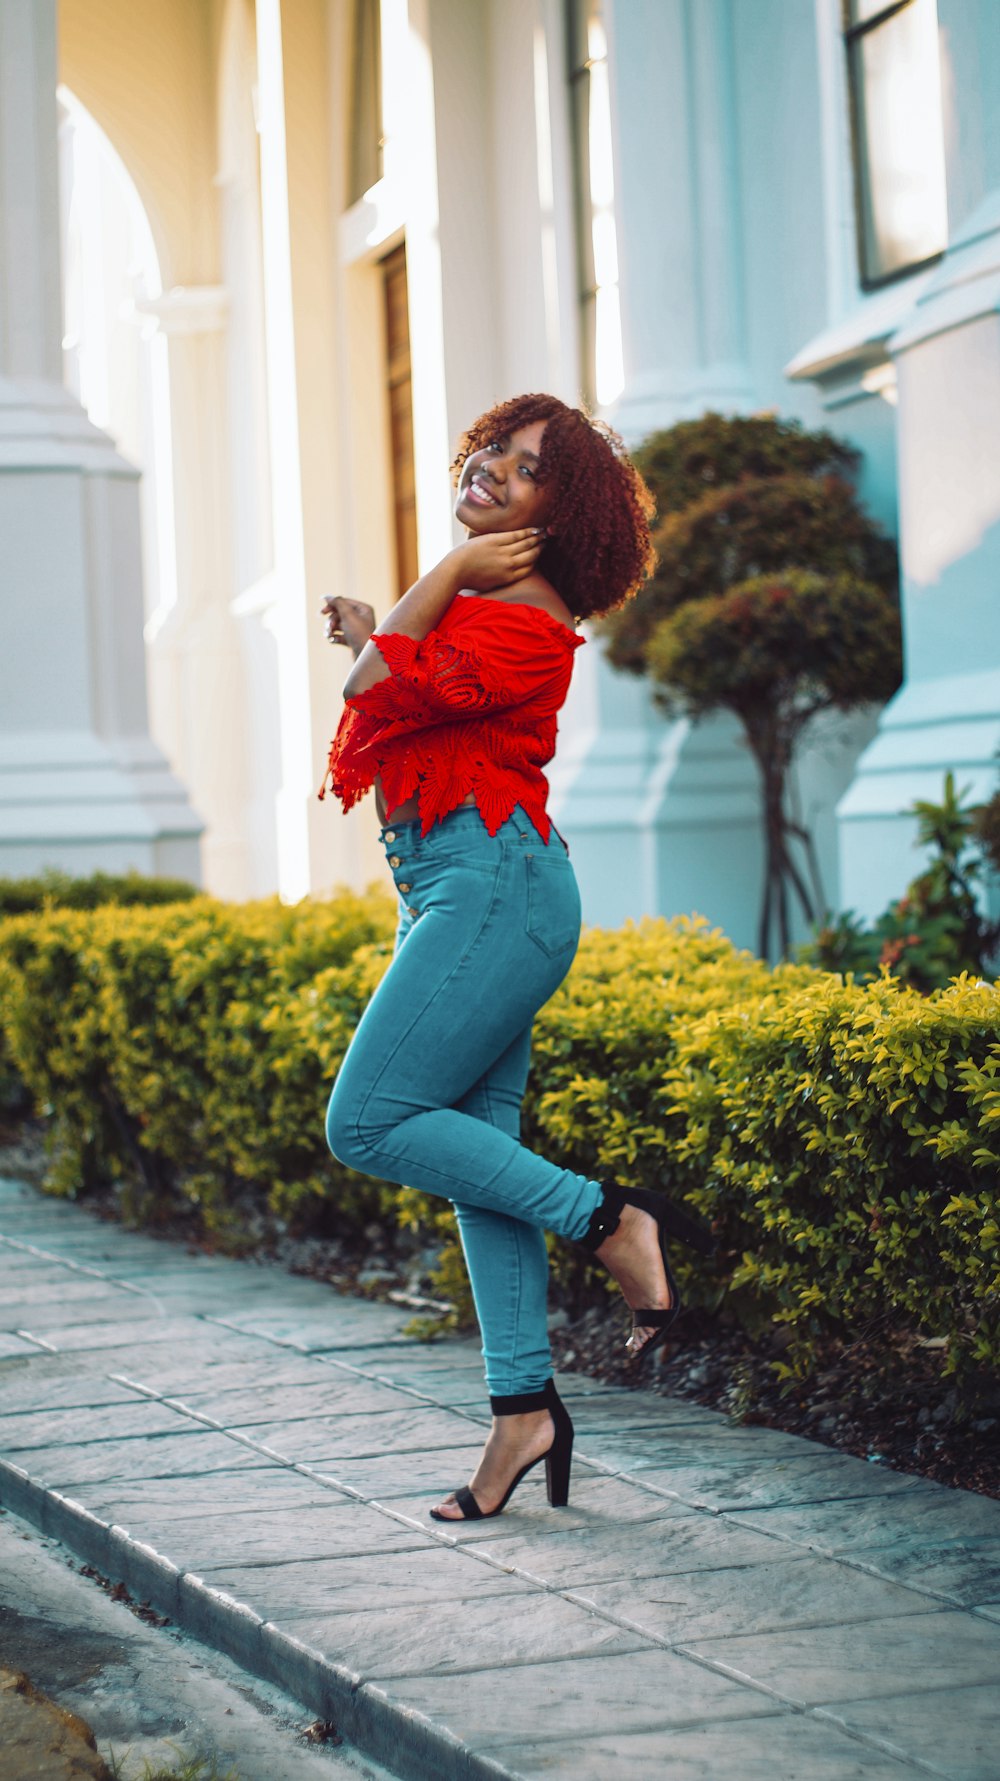 Woman in red shirt and blue denim jeans standing on pathway photo – Free  Dominican republic Image on Unsplash